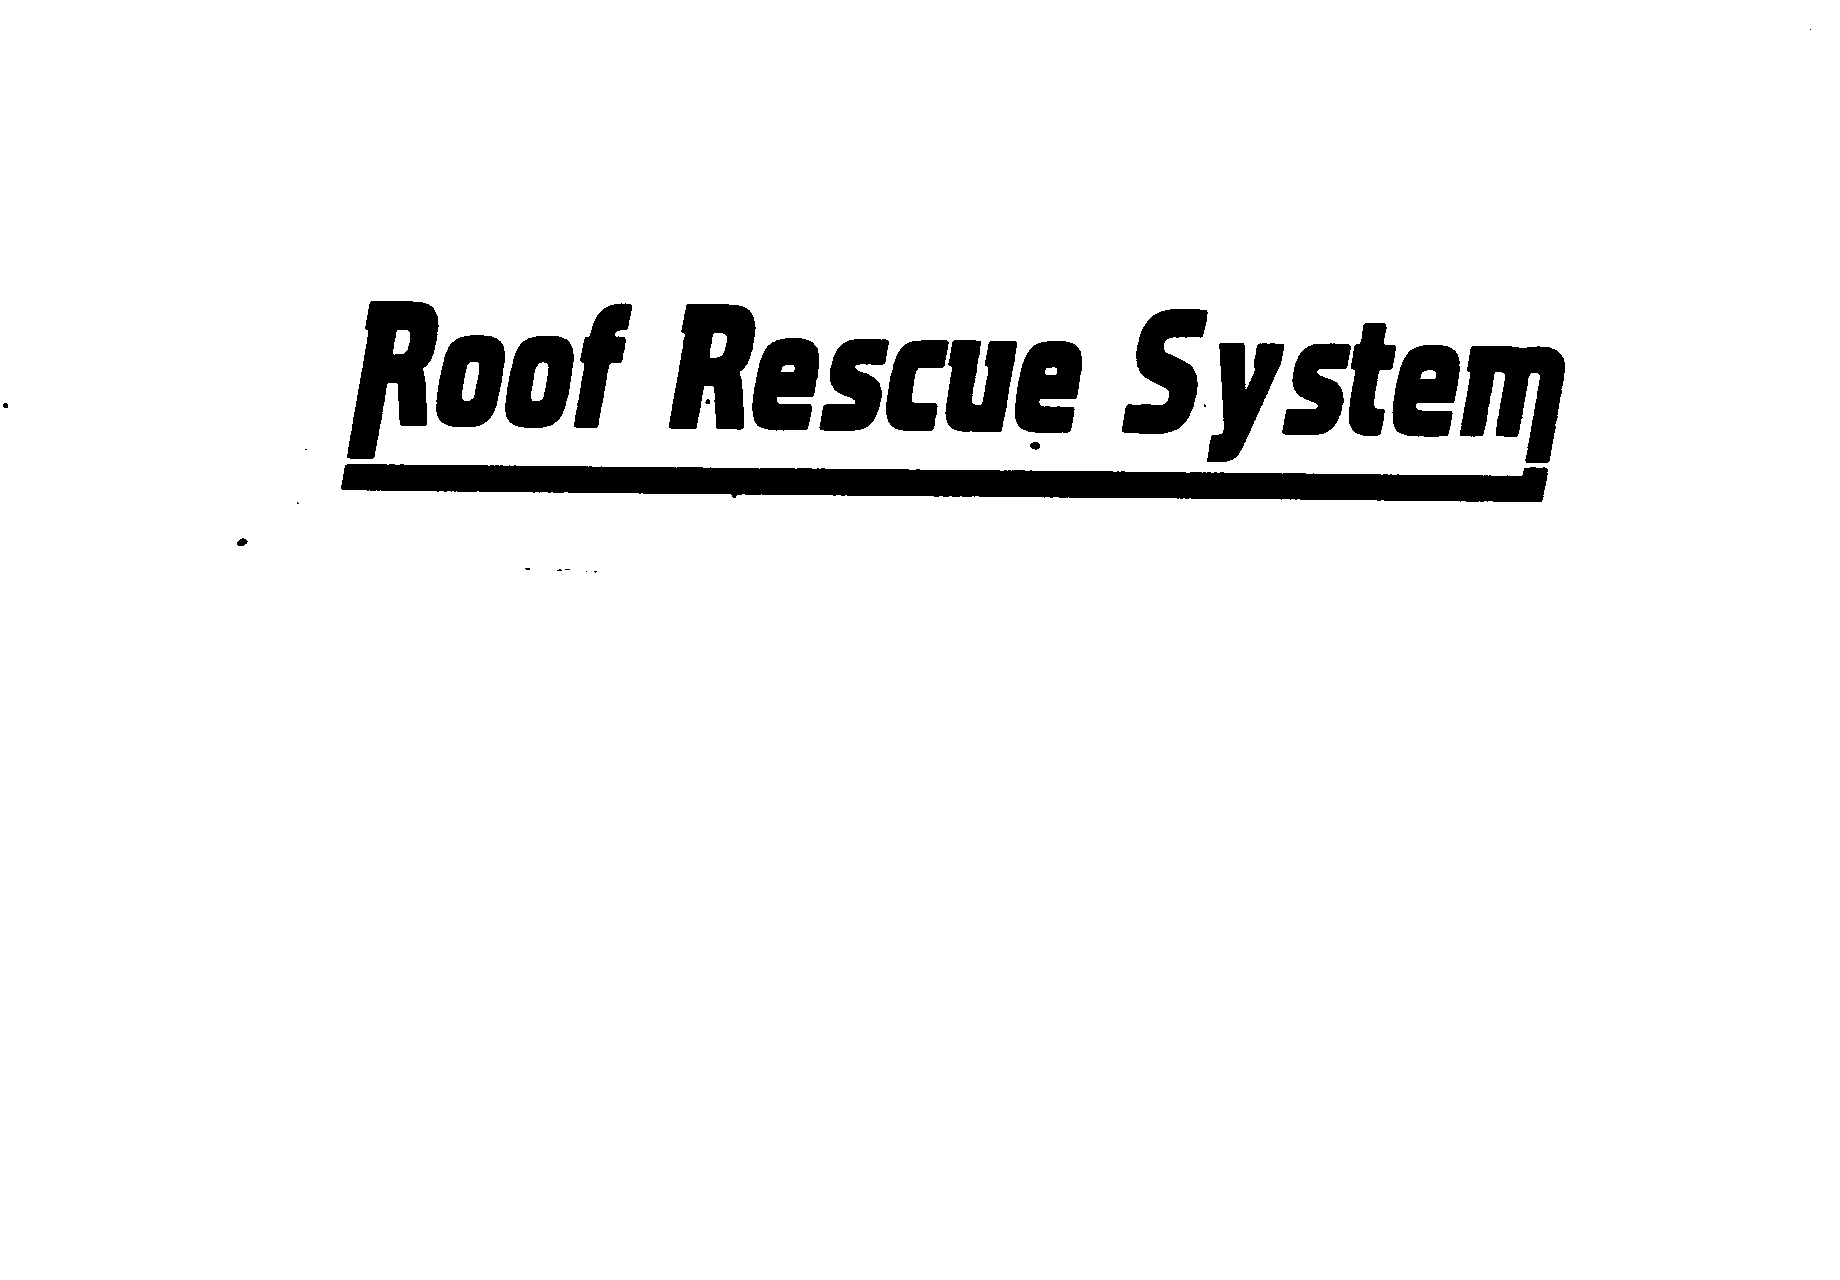  ROOF RESCUE SYSTEM